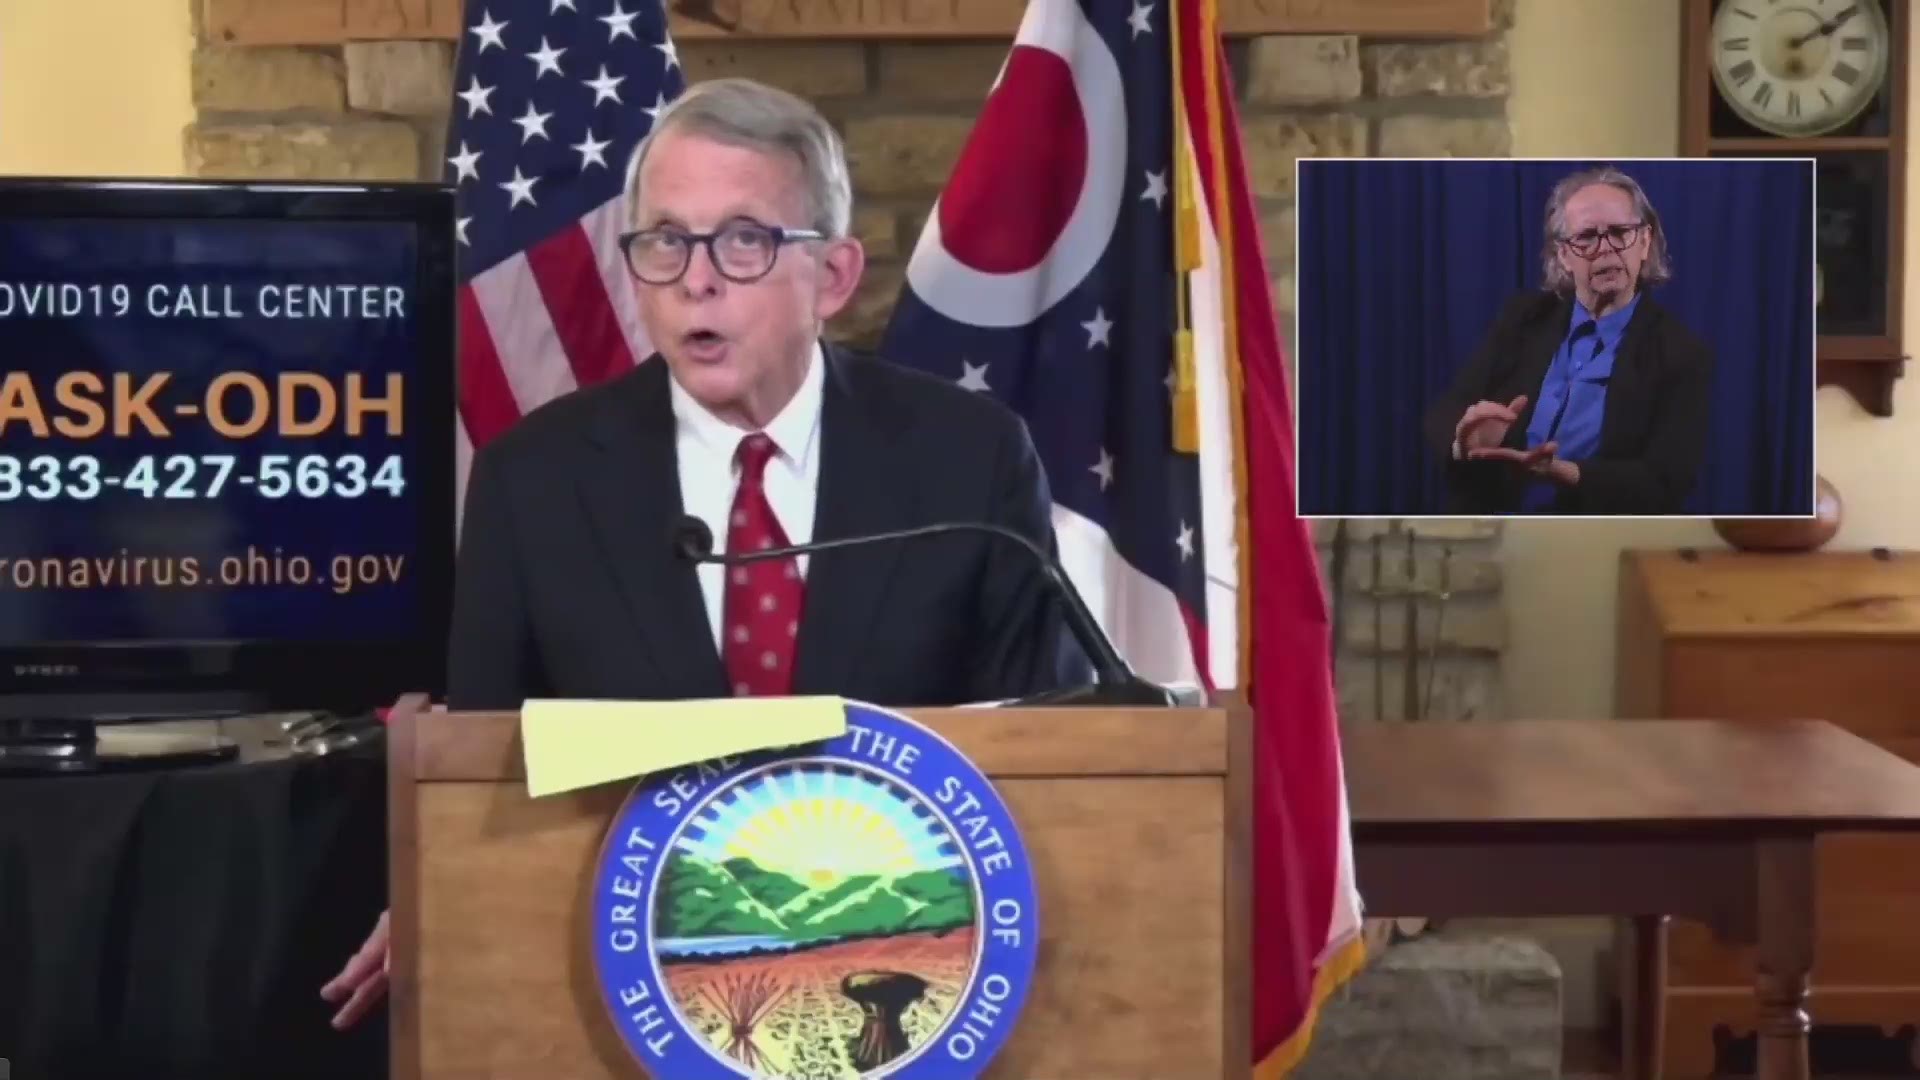 Ohio Governor Mike DeWine announced on Tuesday that the state is implementing a 21-day 10 p.m. curfew beginning on Thursday.